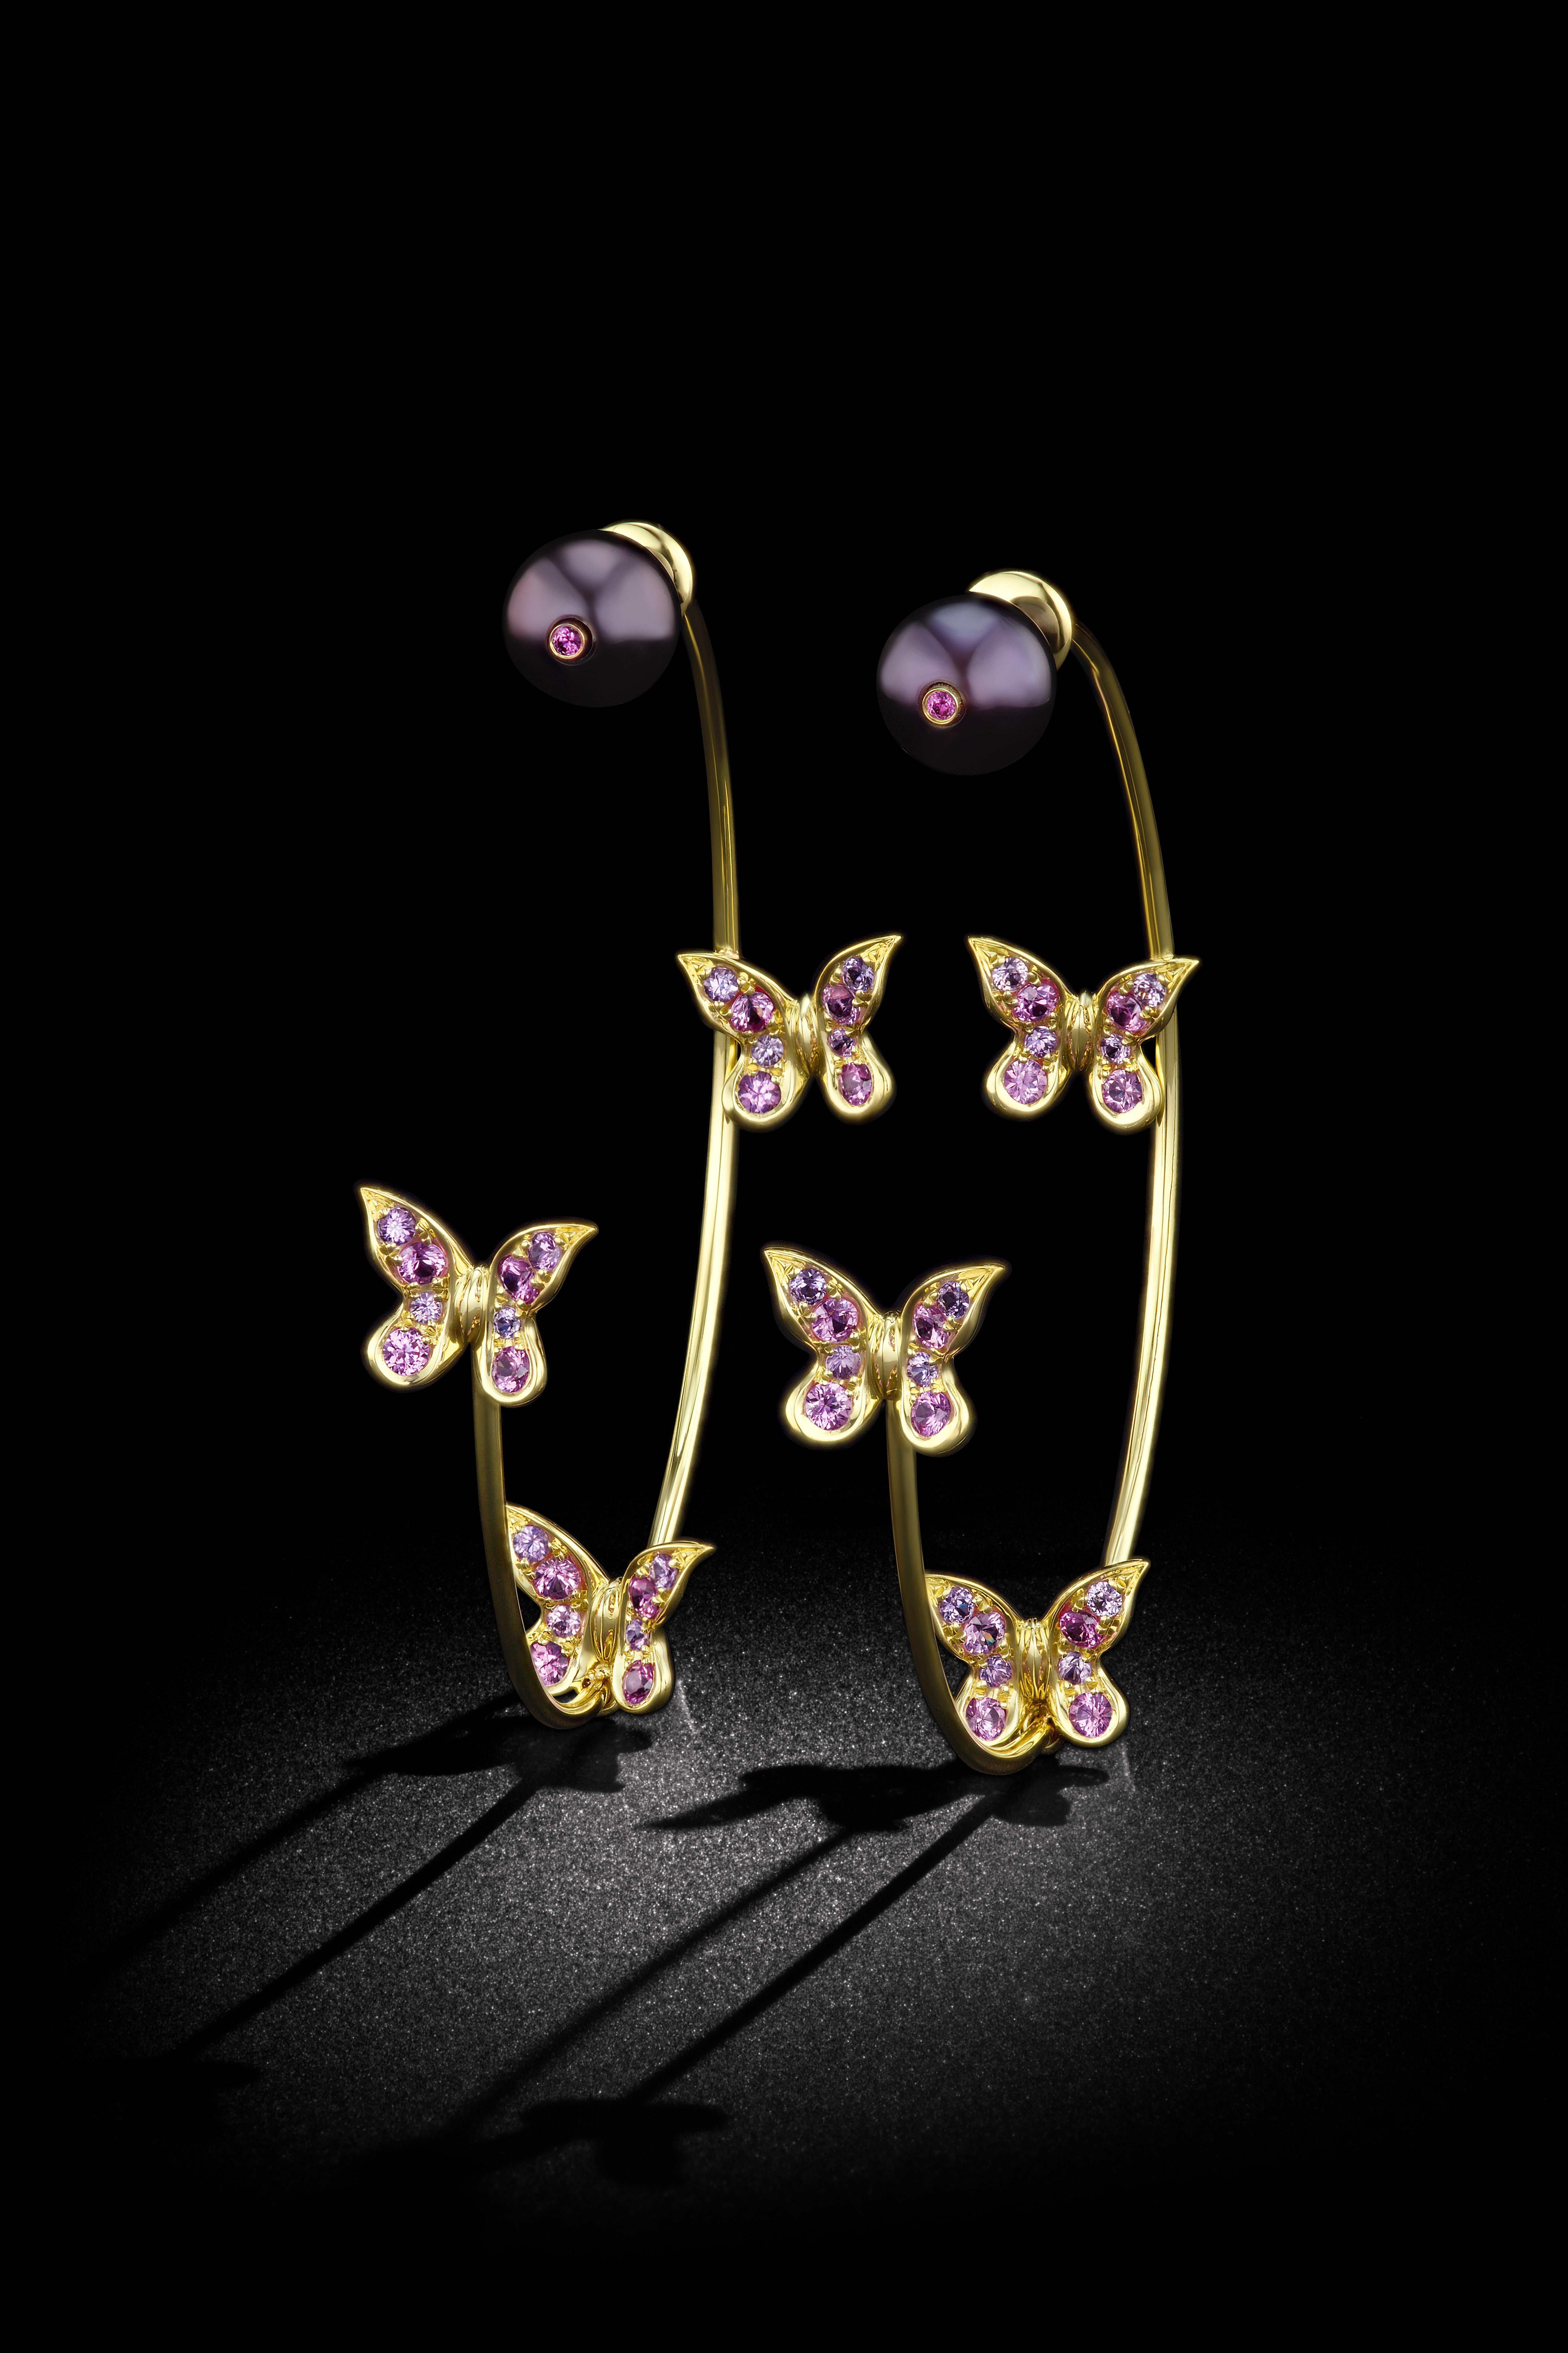 Butterfly and Pearl Flexible Earrings. 18K yellow gold with gold mother of pearl with butterflies in dark pink and purple sapphires. 

